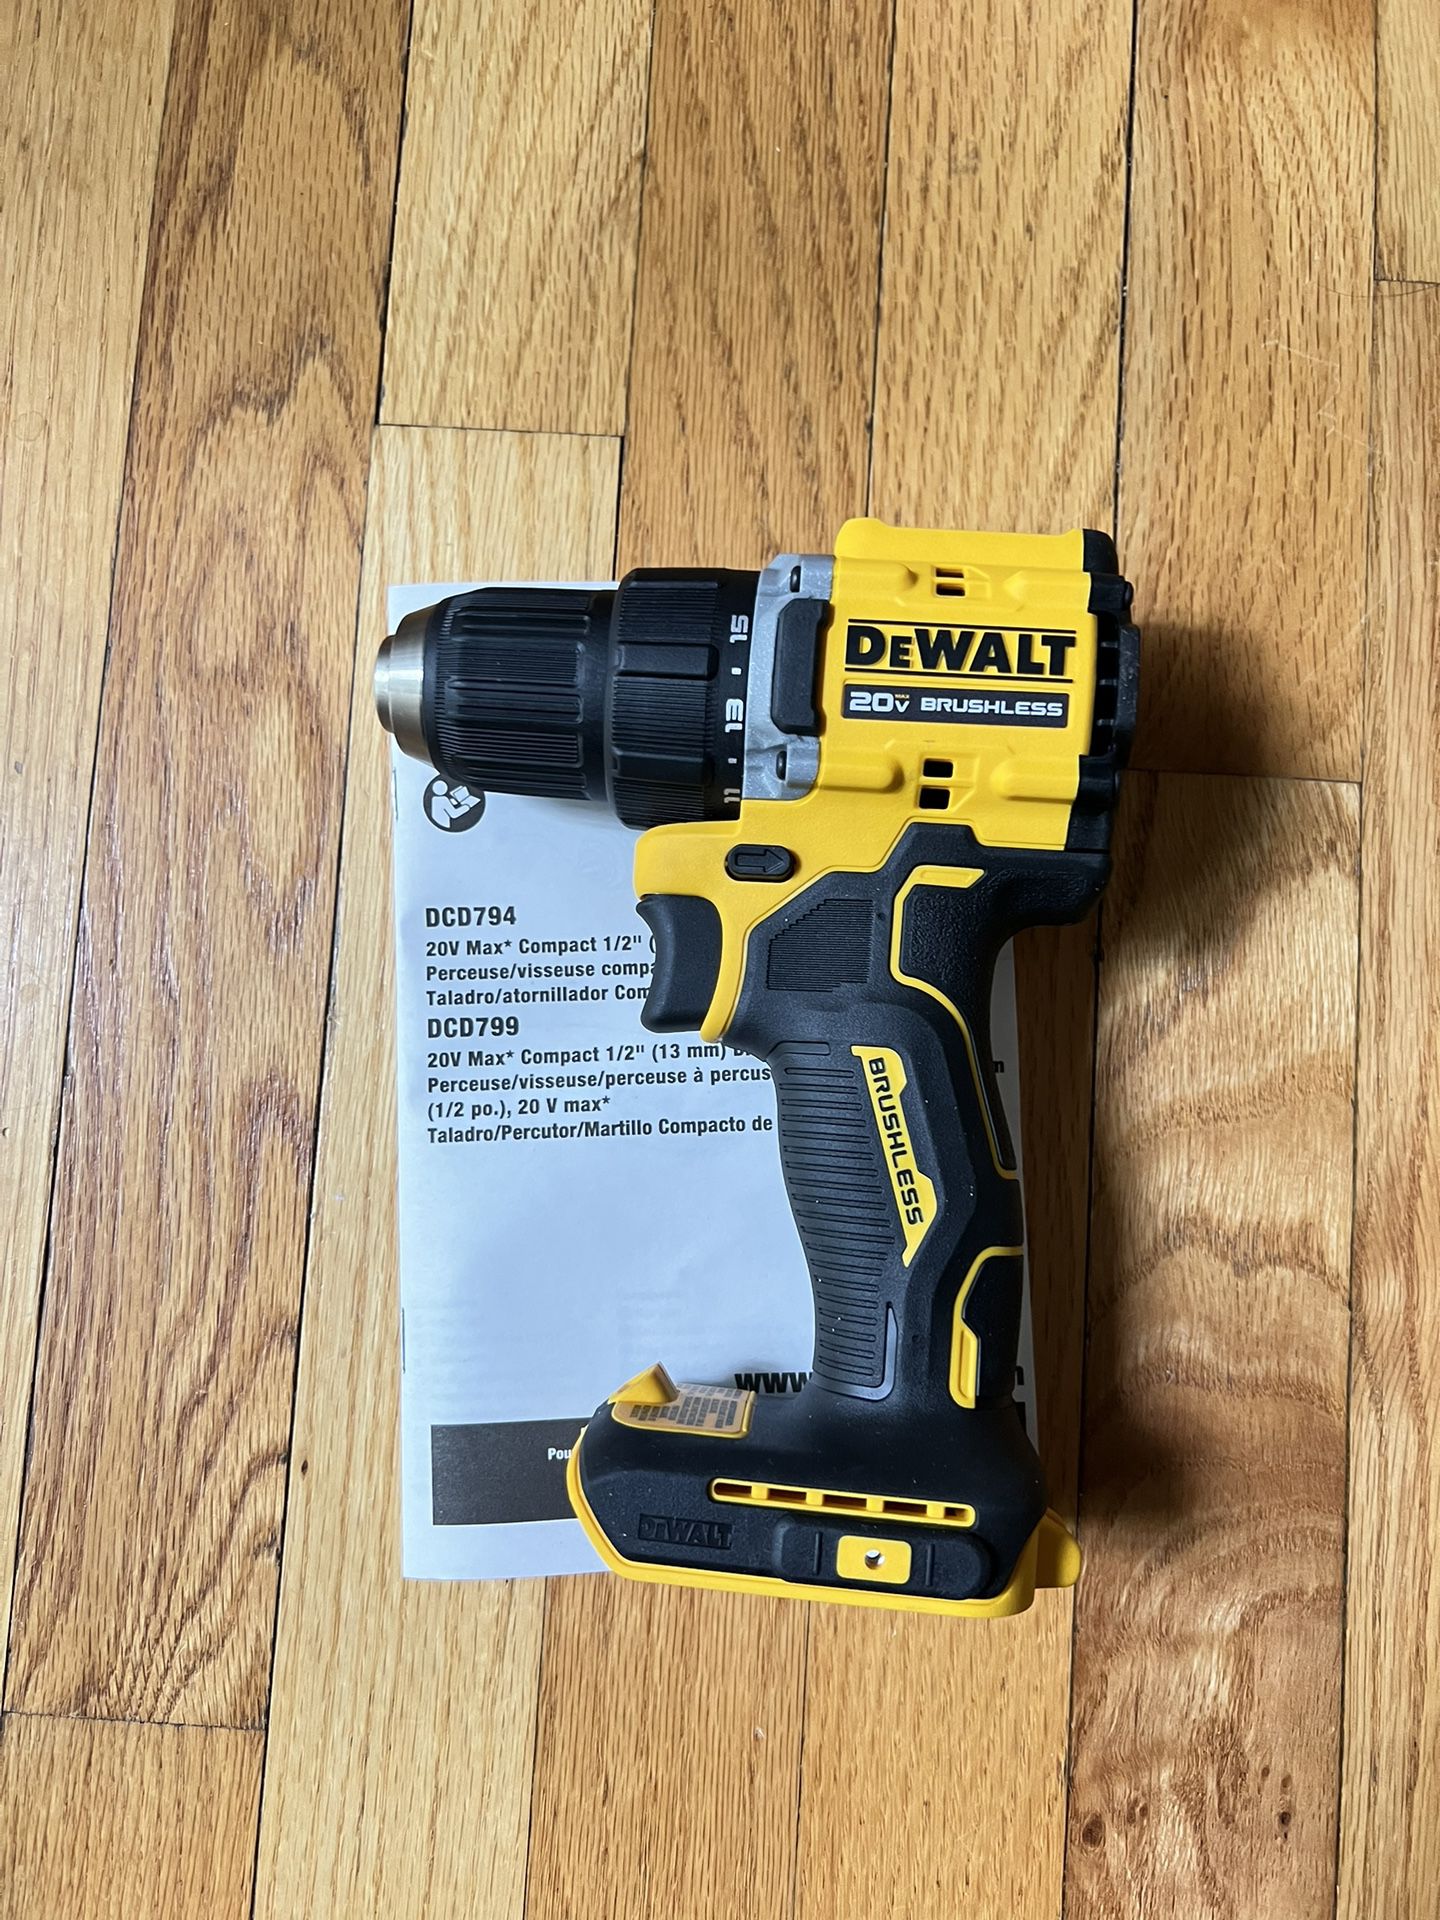 Dewalt 20V Brushless 1/2” Comact Drill/driver ( Tool Only)